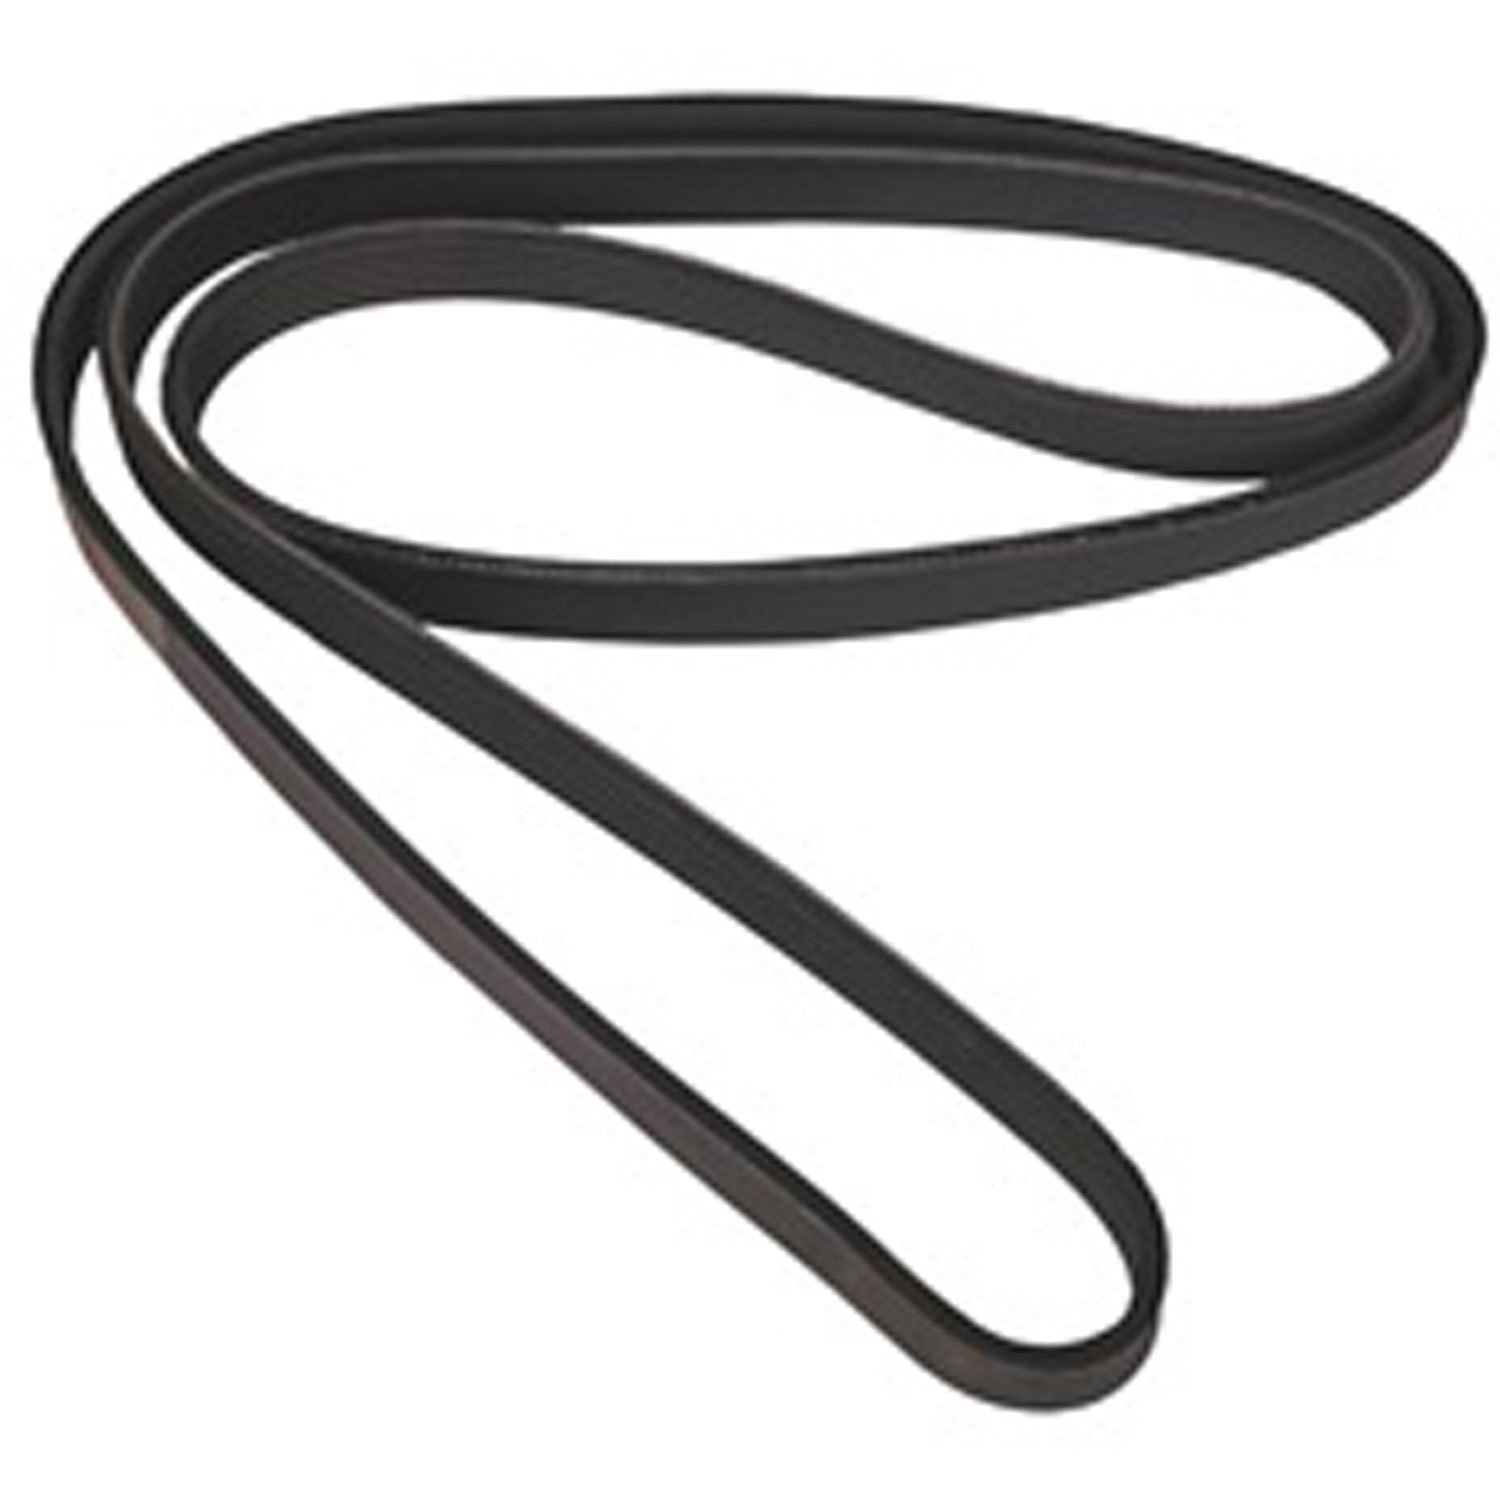 Stock replacement serpentine belt from Omix-ADA, Fits 87-90 Jeep Cherokee XJ with 4.0 liter engine